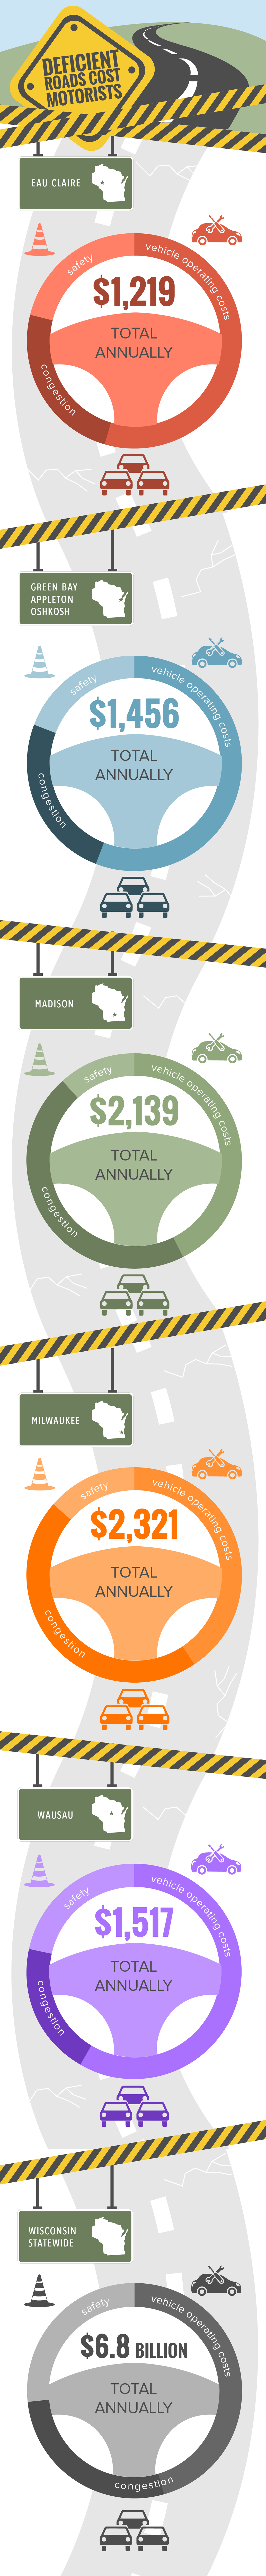 Wisconsin Cost to Motorists Infographic